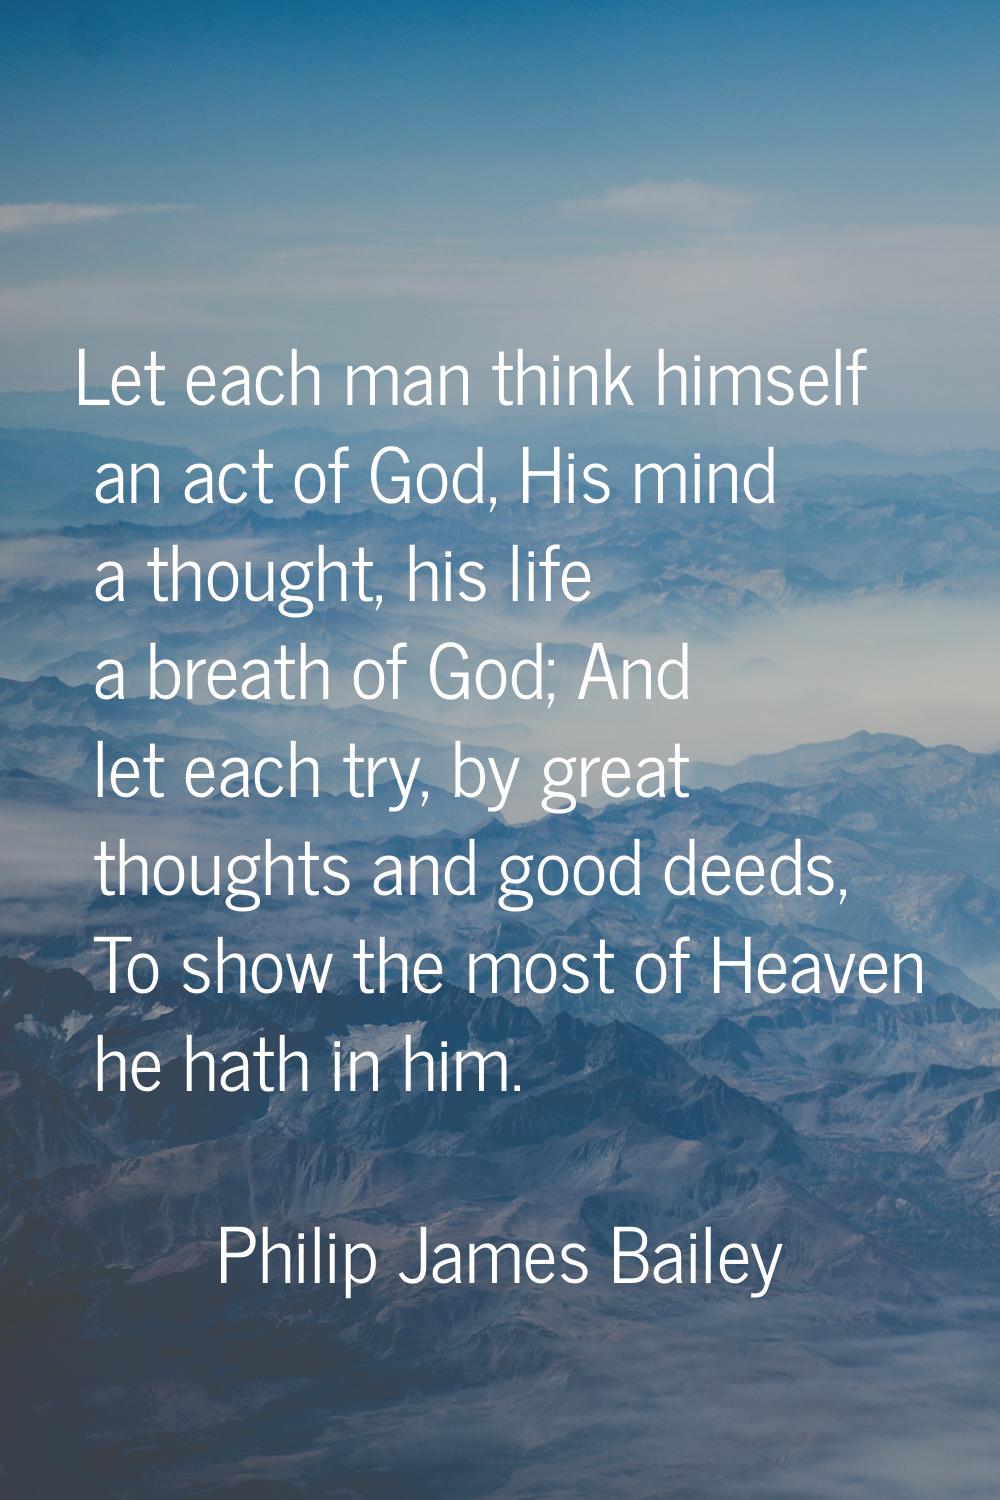 Let each man think himself an act of God, His mind a thought, his life a breath of God; And let eac